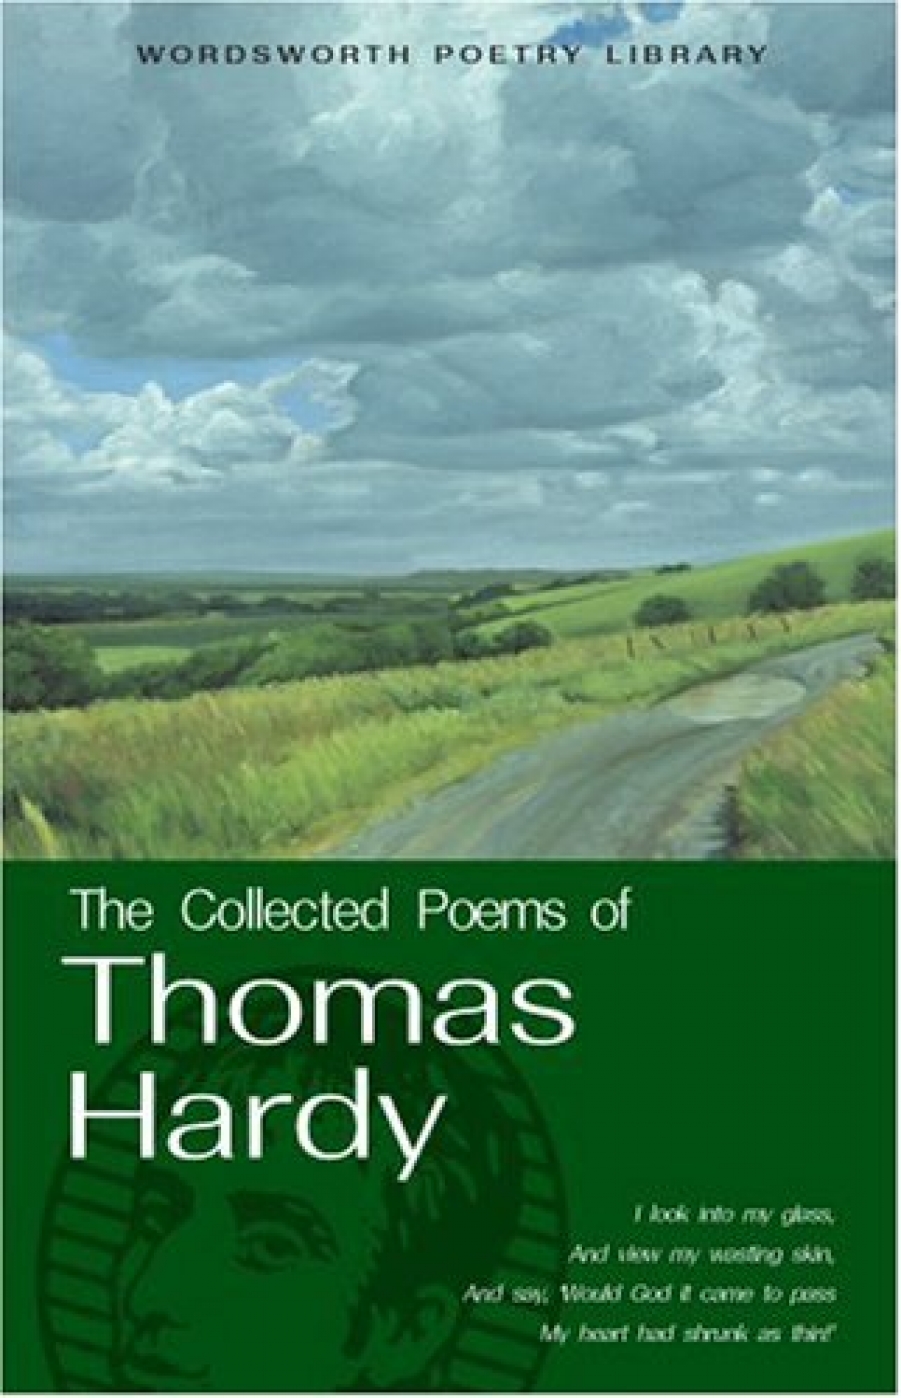 Thomas, Hardy Collected poems 